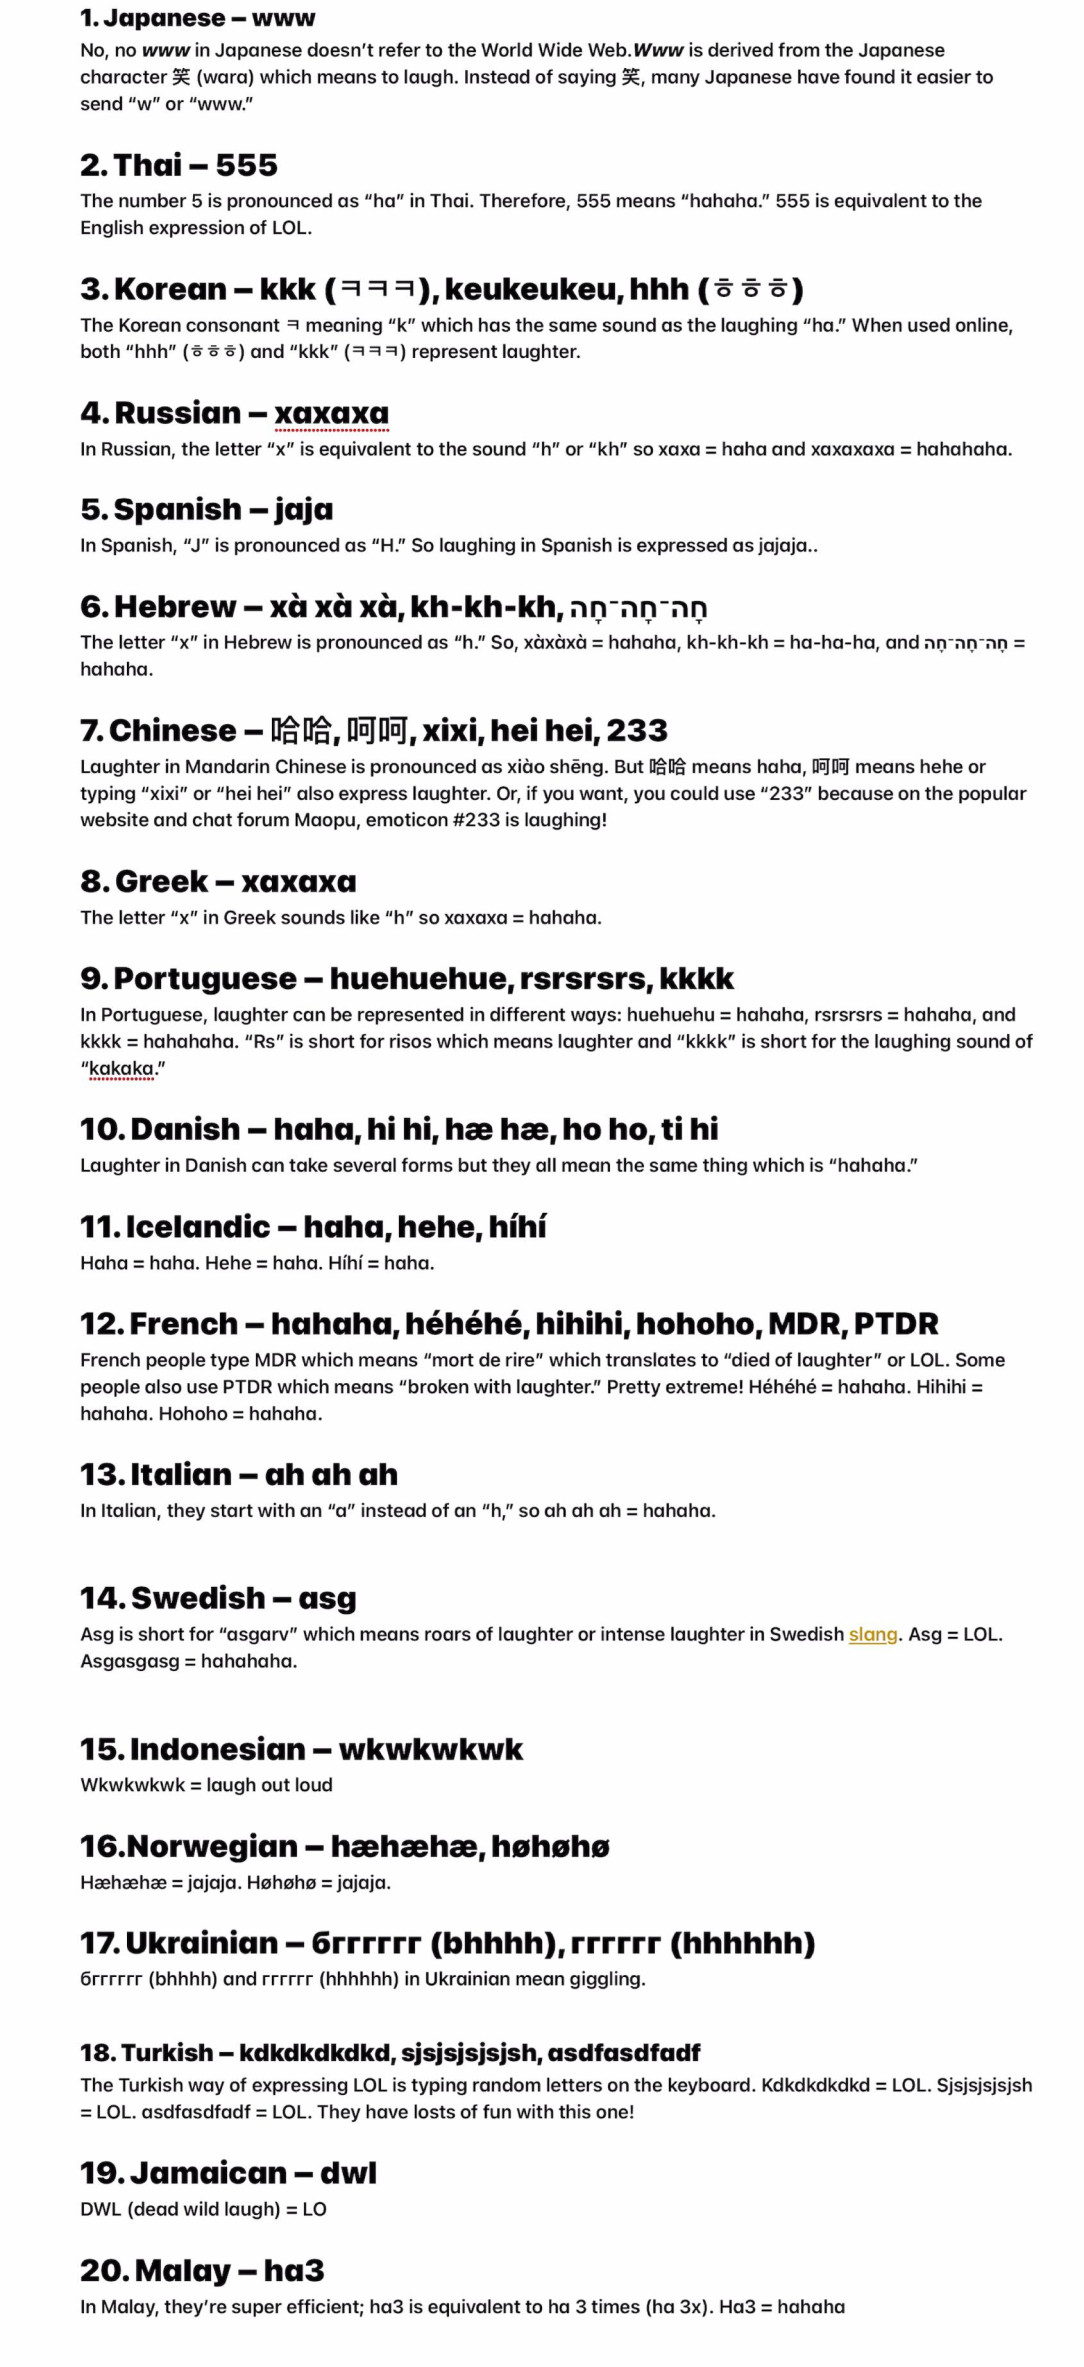 How people illustrate laughter in text around the world